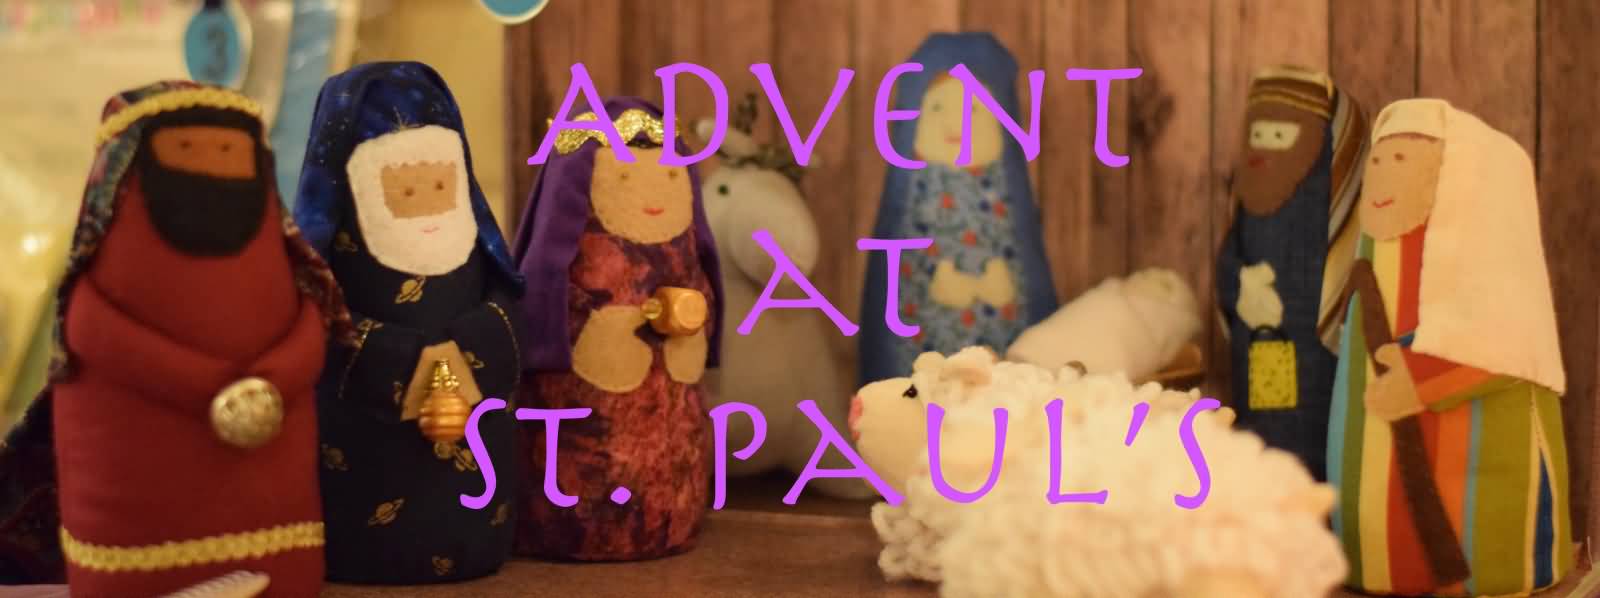 Advent At St. Paul's